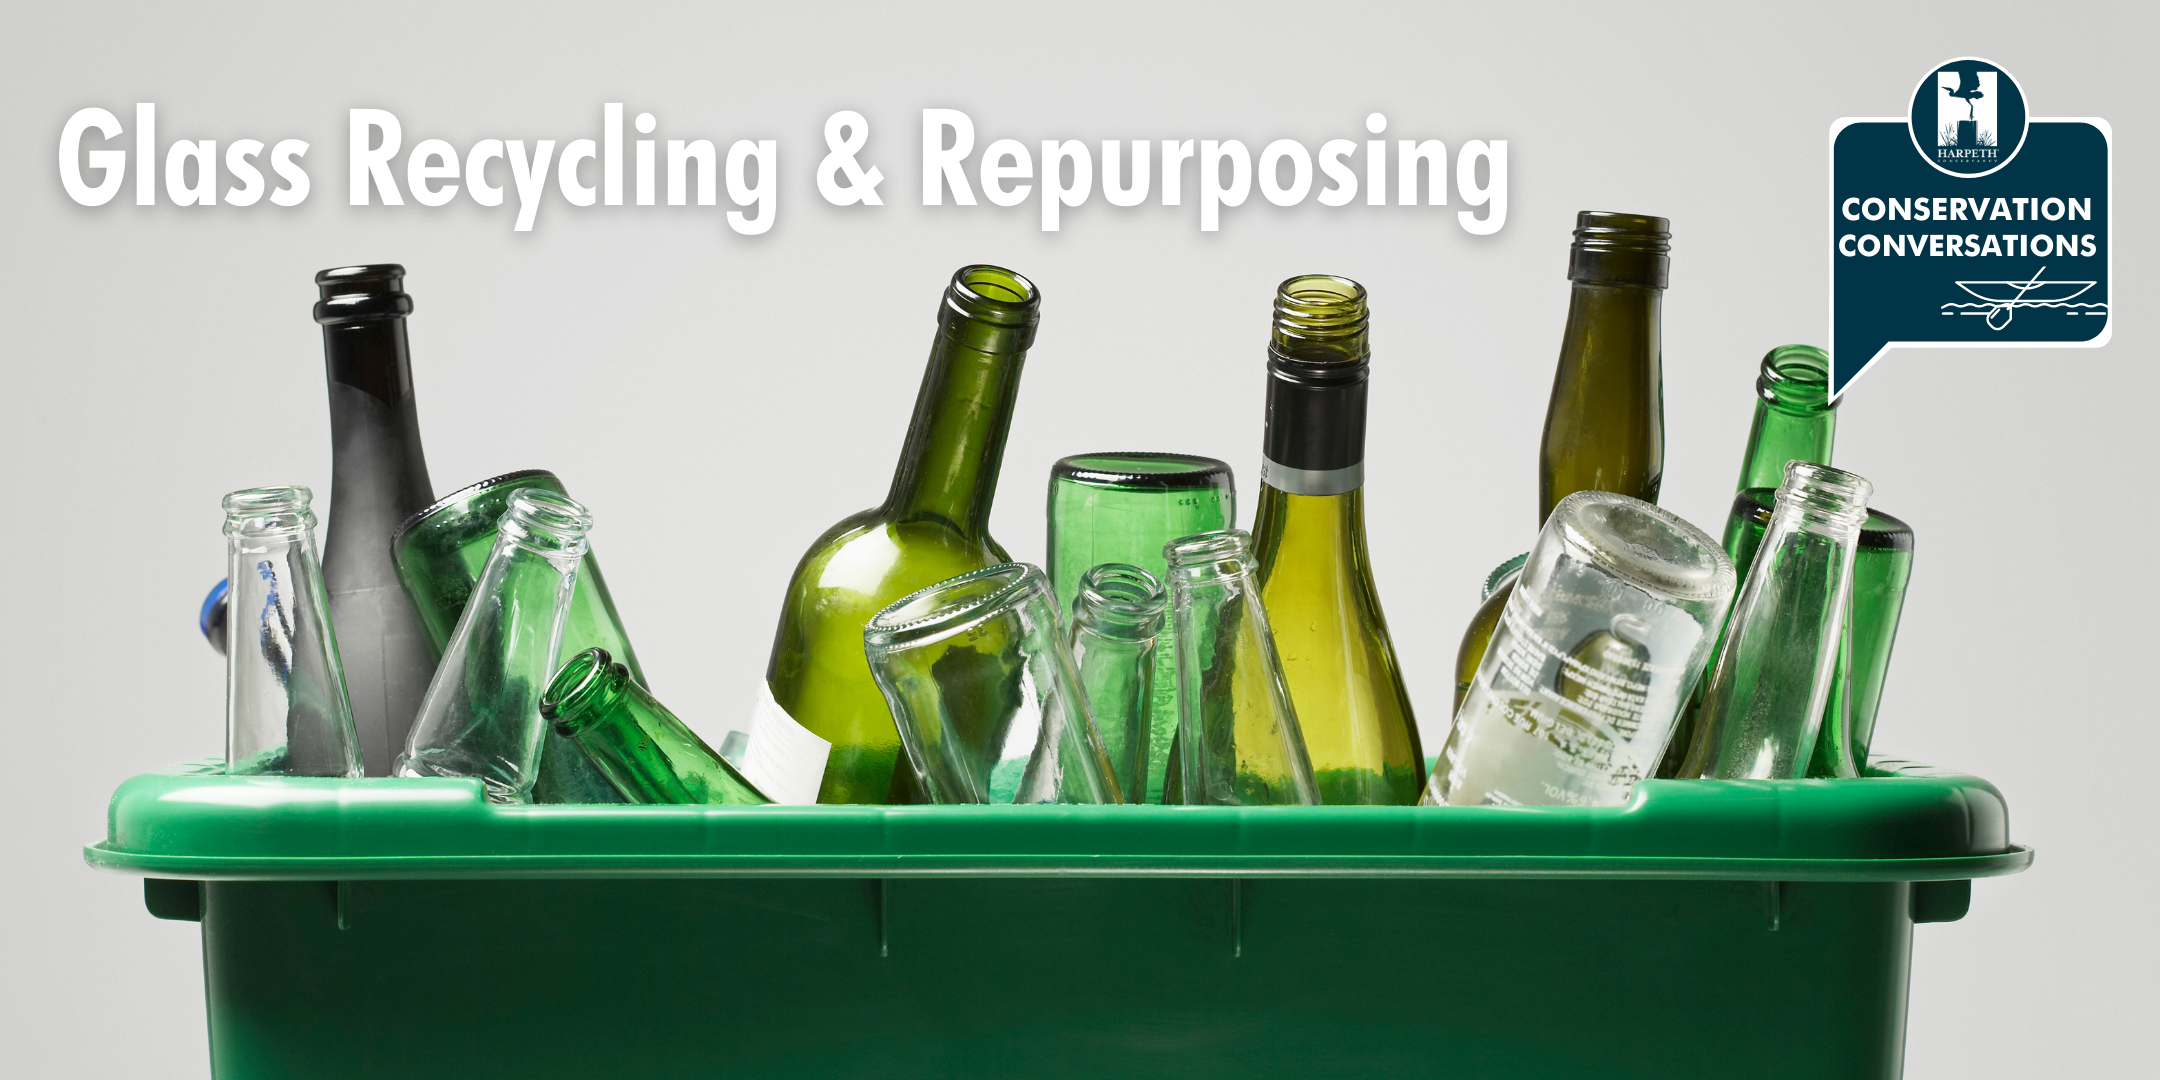 Conservation Conversations: Glass Recycling and Repurposing